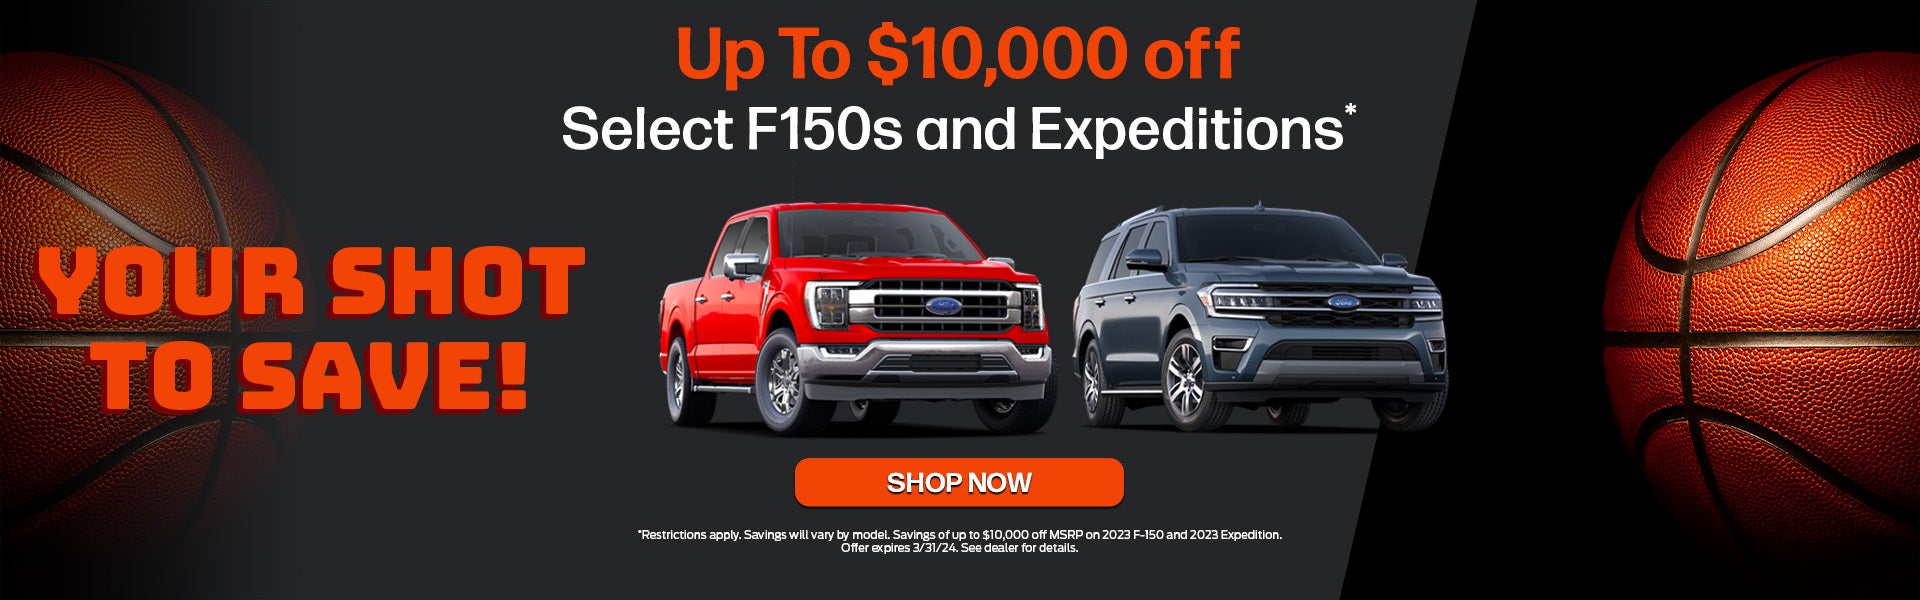 Ten thousand off Ford F-150 and Expedition